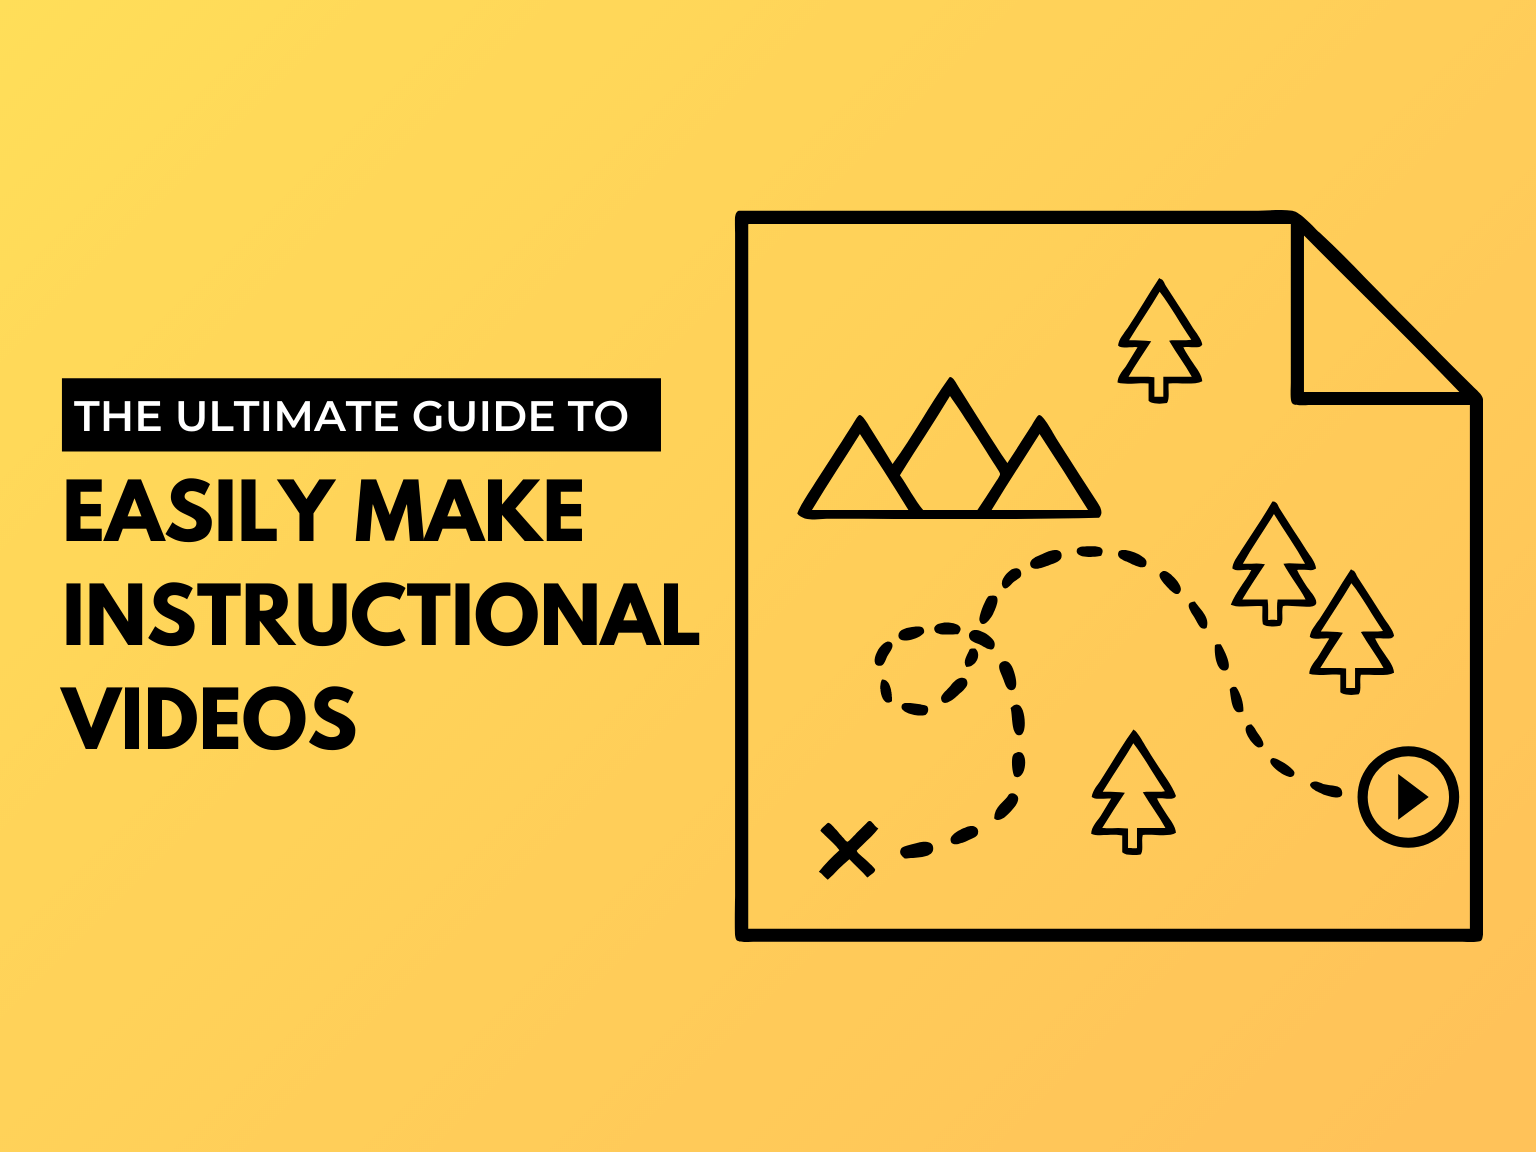 The Ultimate Guide to Easily Make Instructional Videos | The TechSmith Blog